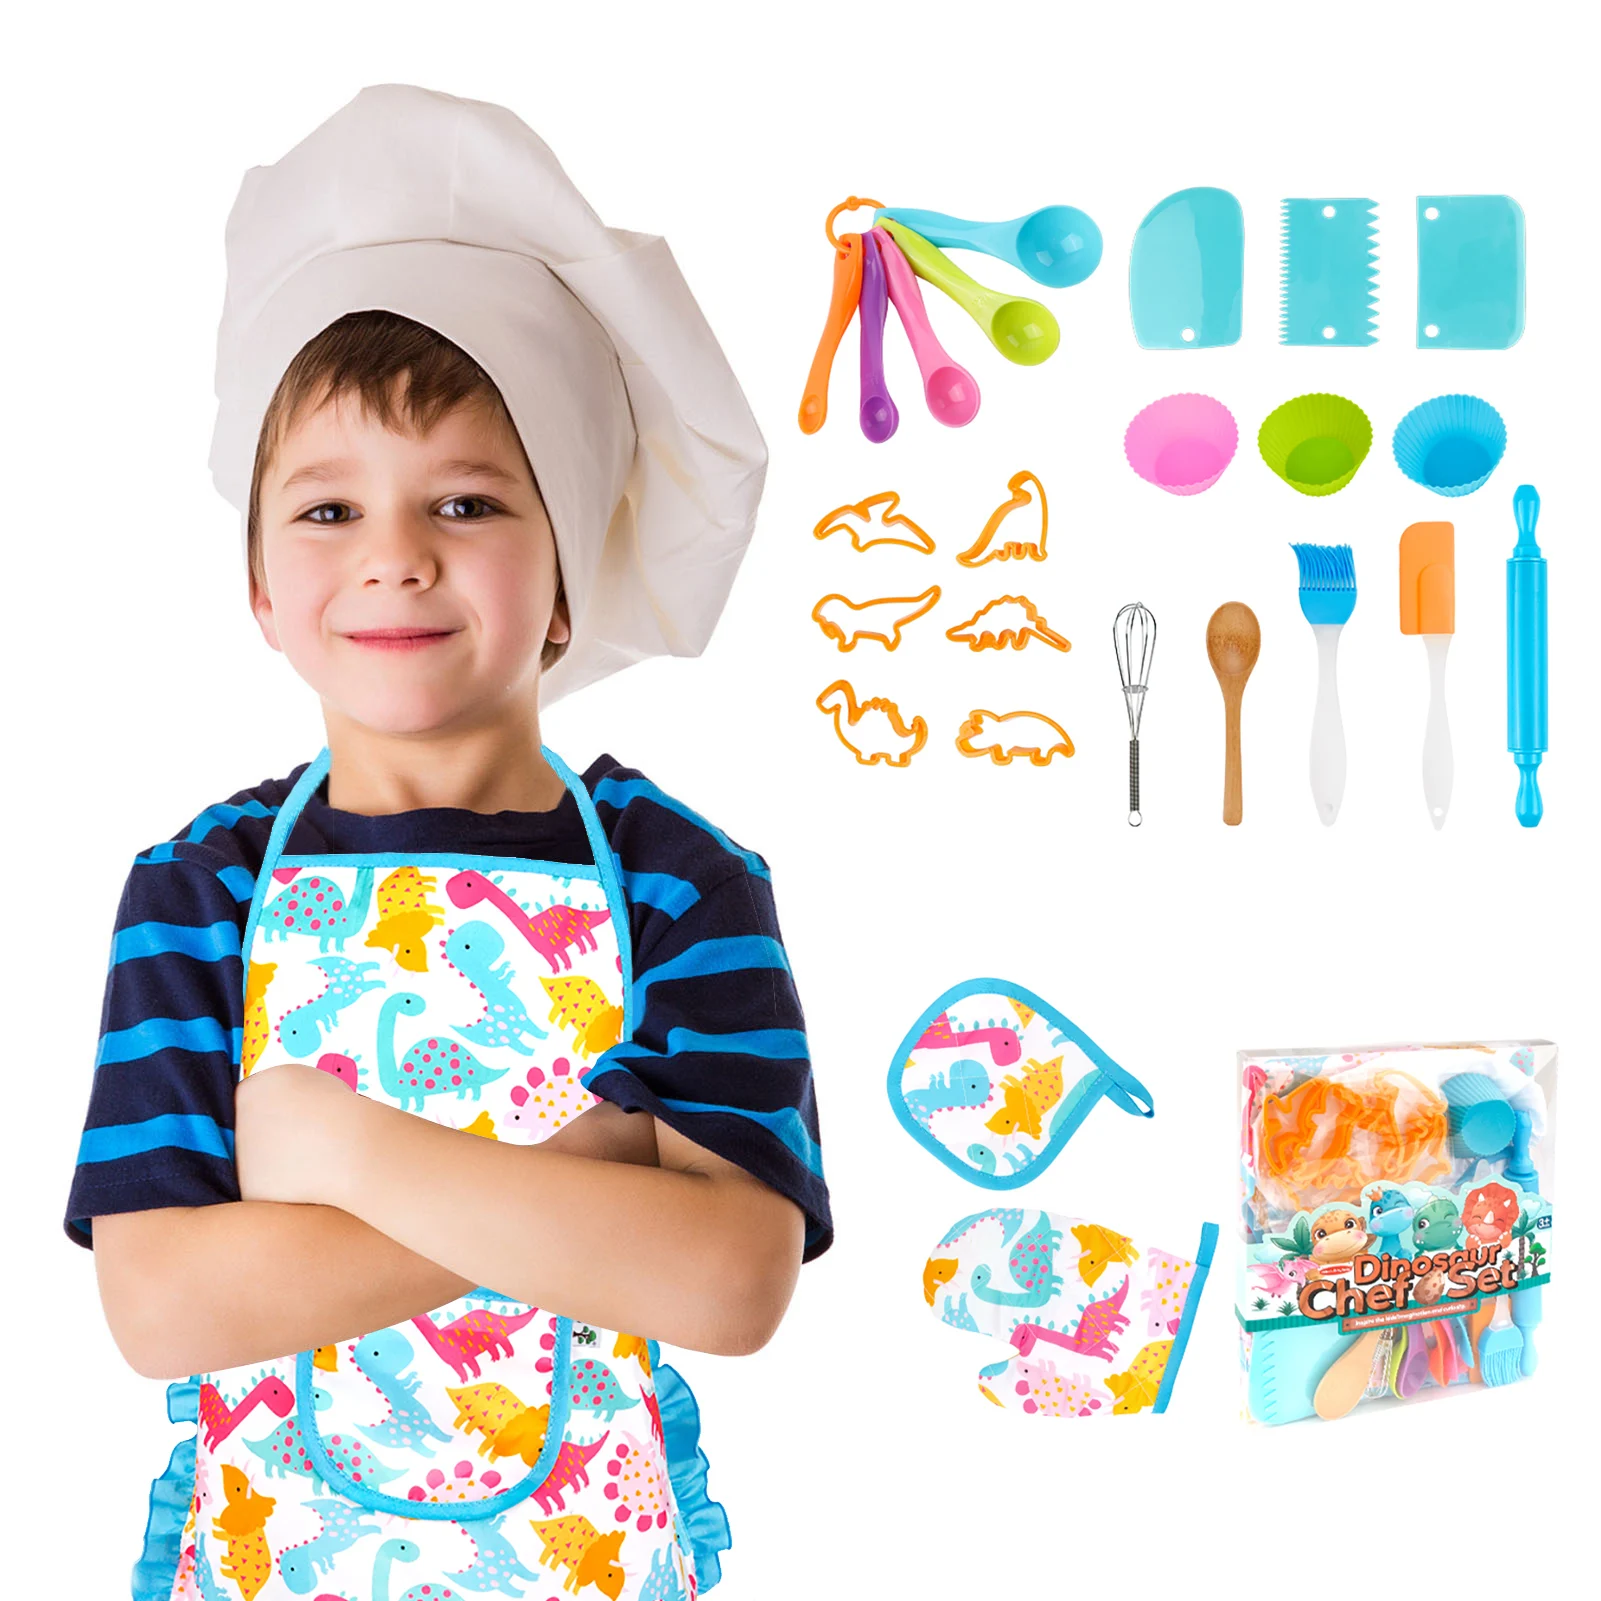 Dress up Chef Role Play Toys for Toddlers Girls 3 Years Jellydog Toy Kids Cooking Set for Girls,26 Pcs Kids Apron Costume Cooking Baking Set 